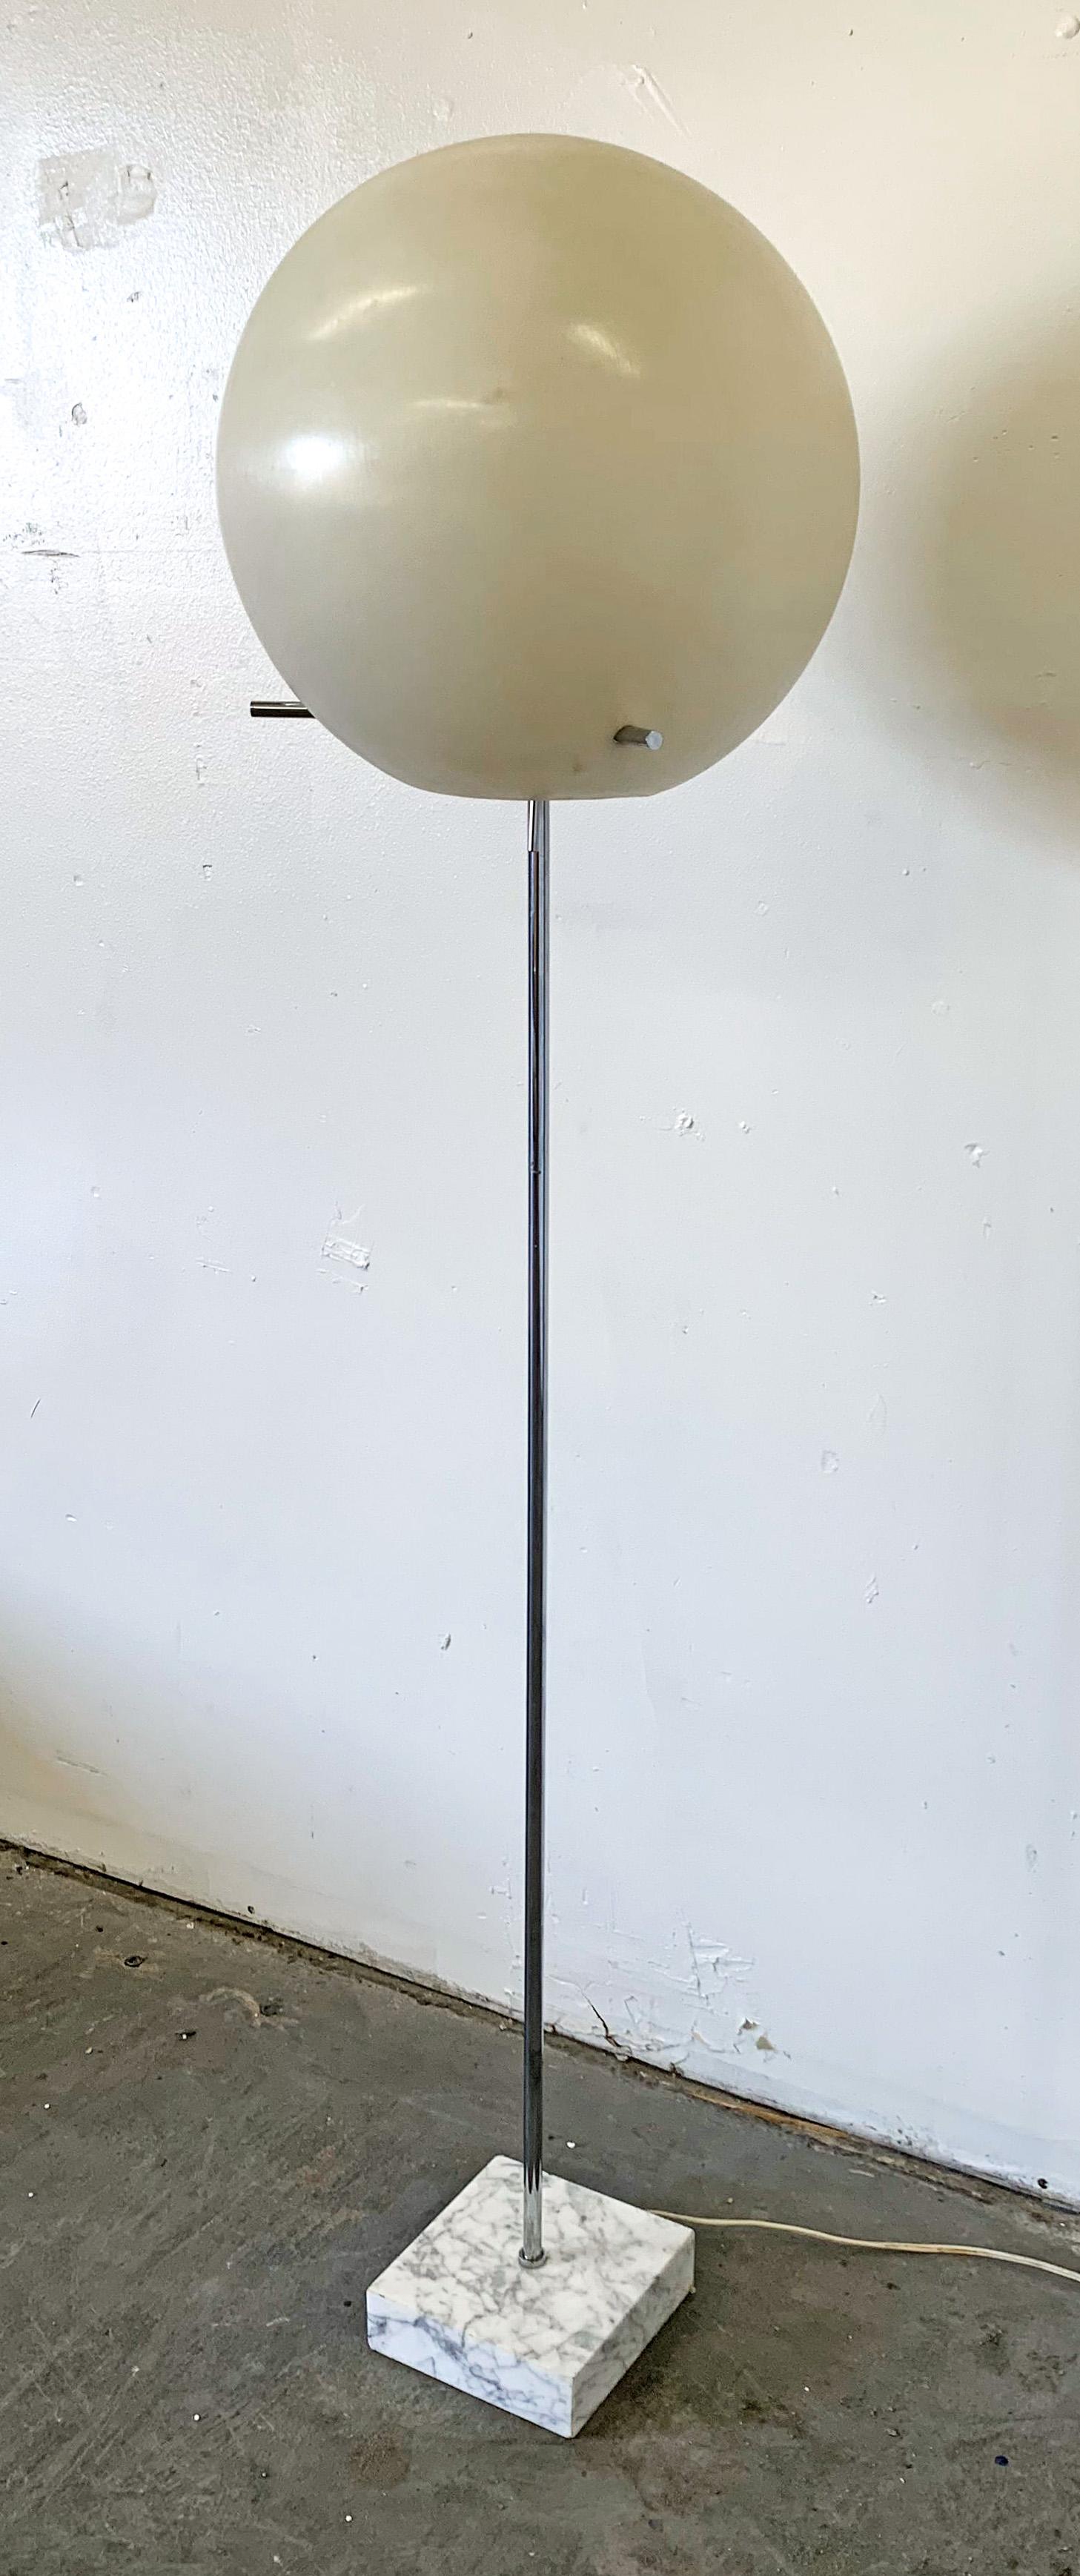 Available right now we have a gorgeous lollipop floor lamp by Robert Sonneman. These lamps were popularized in the 1960s and 1970s and while this specific lamp is only meant for indoor use, many influential architects used this lollipop / globe